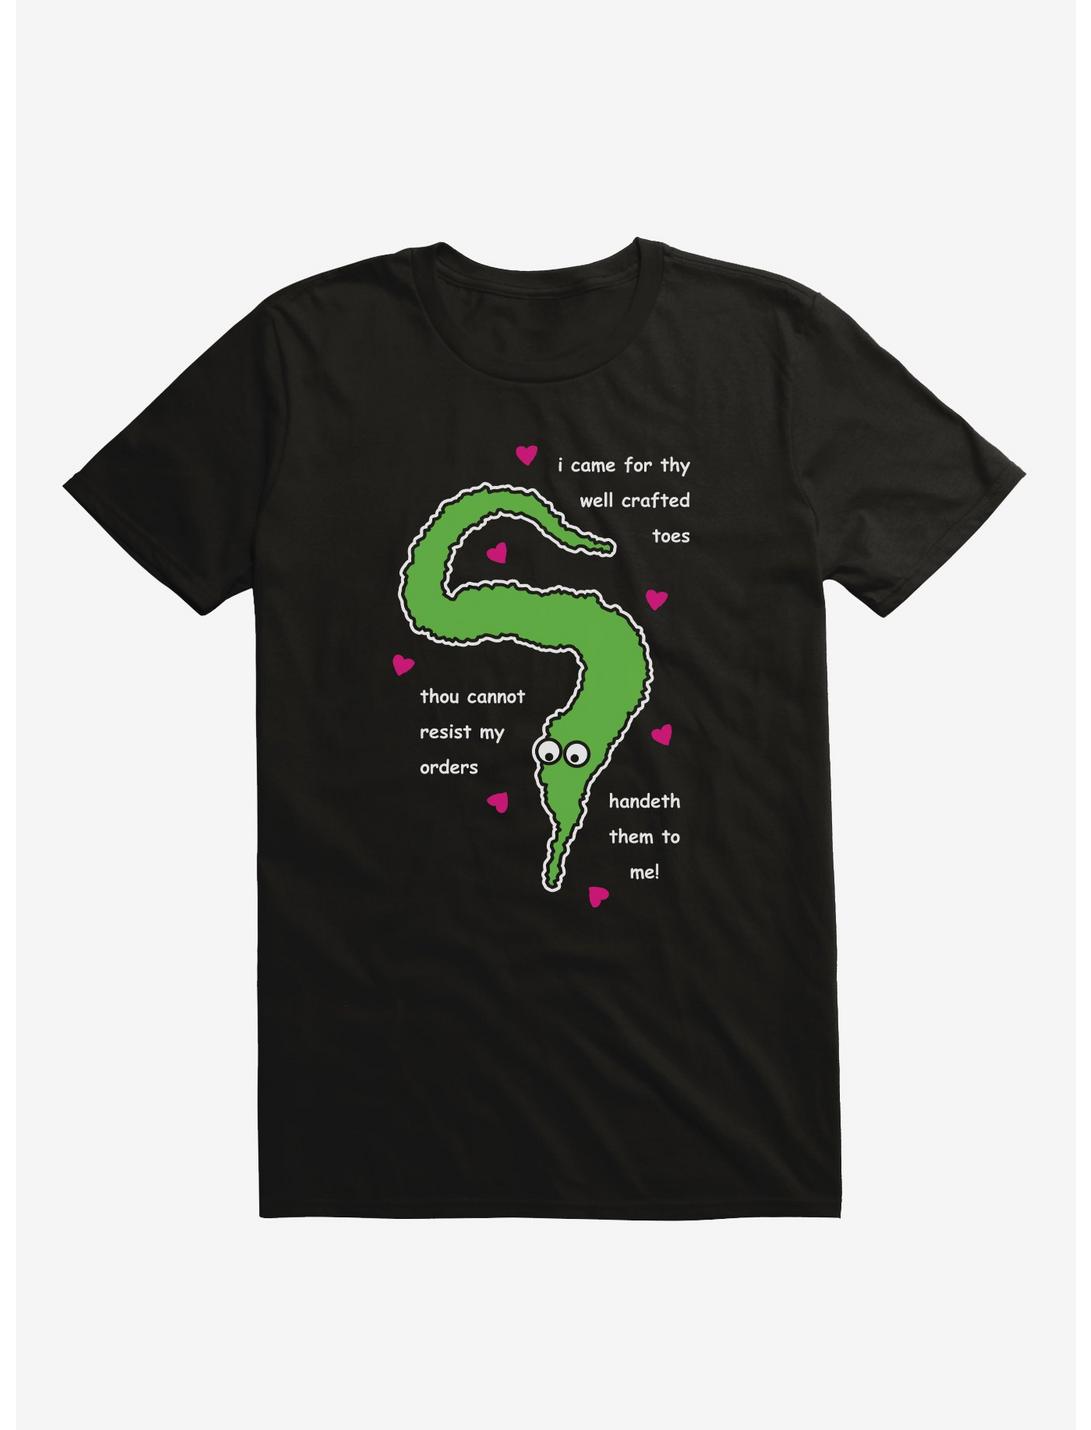 Toes For Worm Hearts T-Shirt, BLACK, hi-res